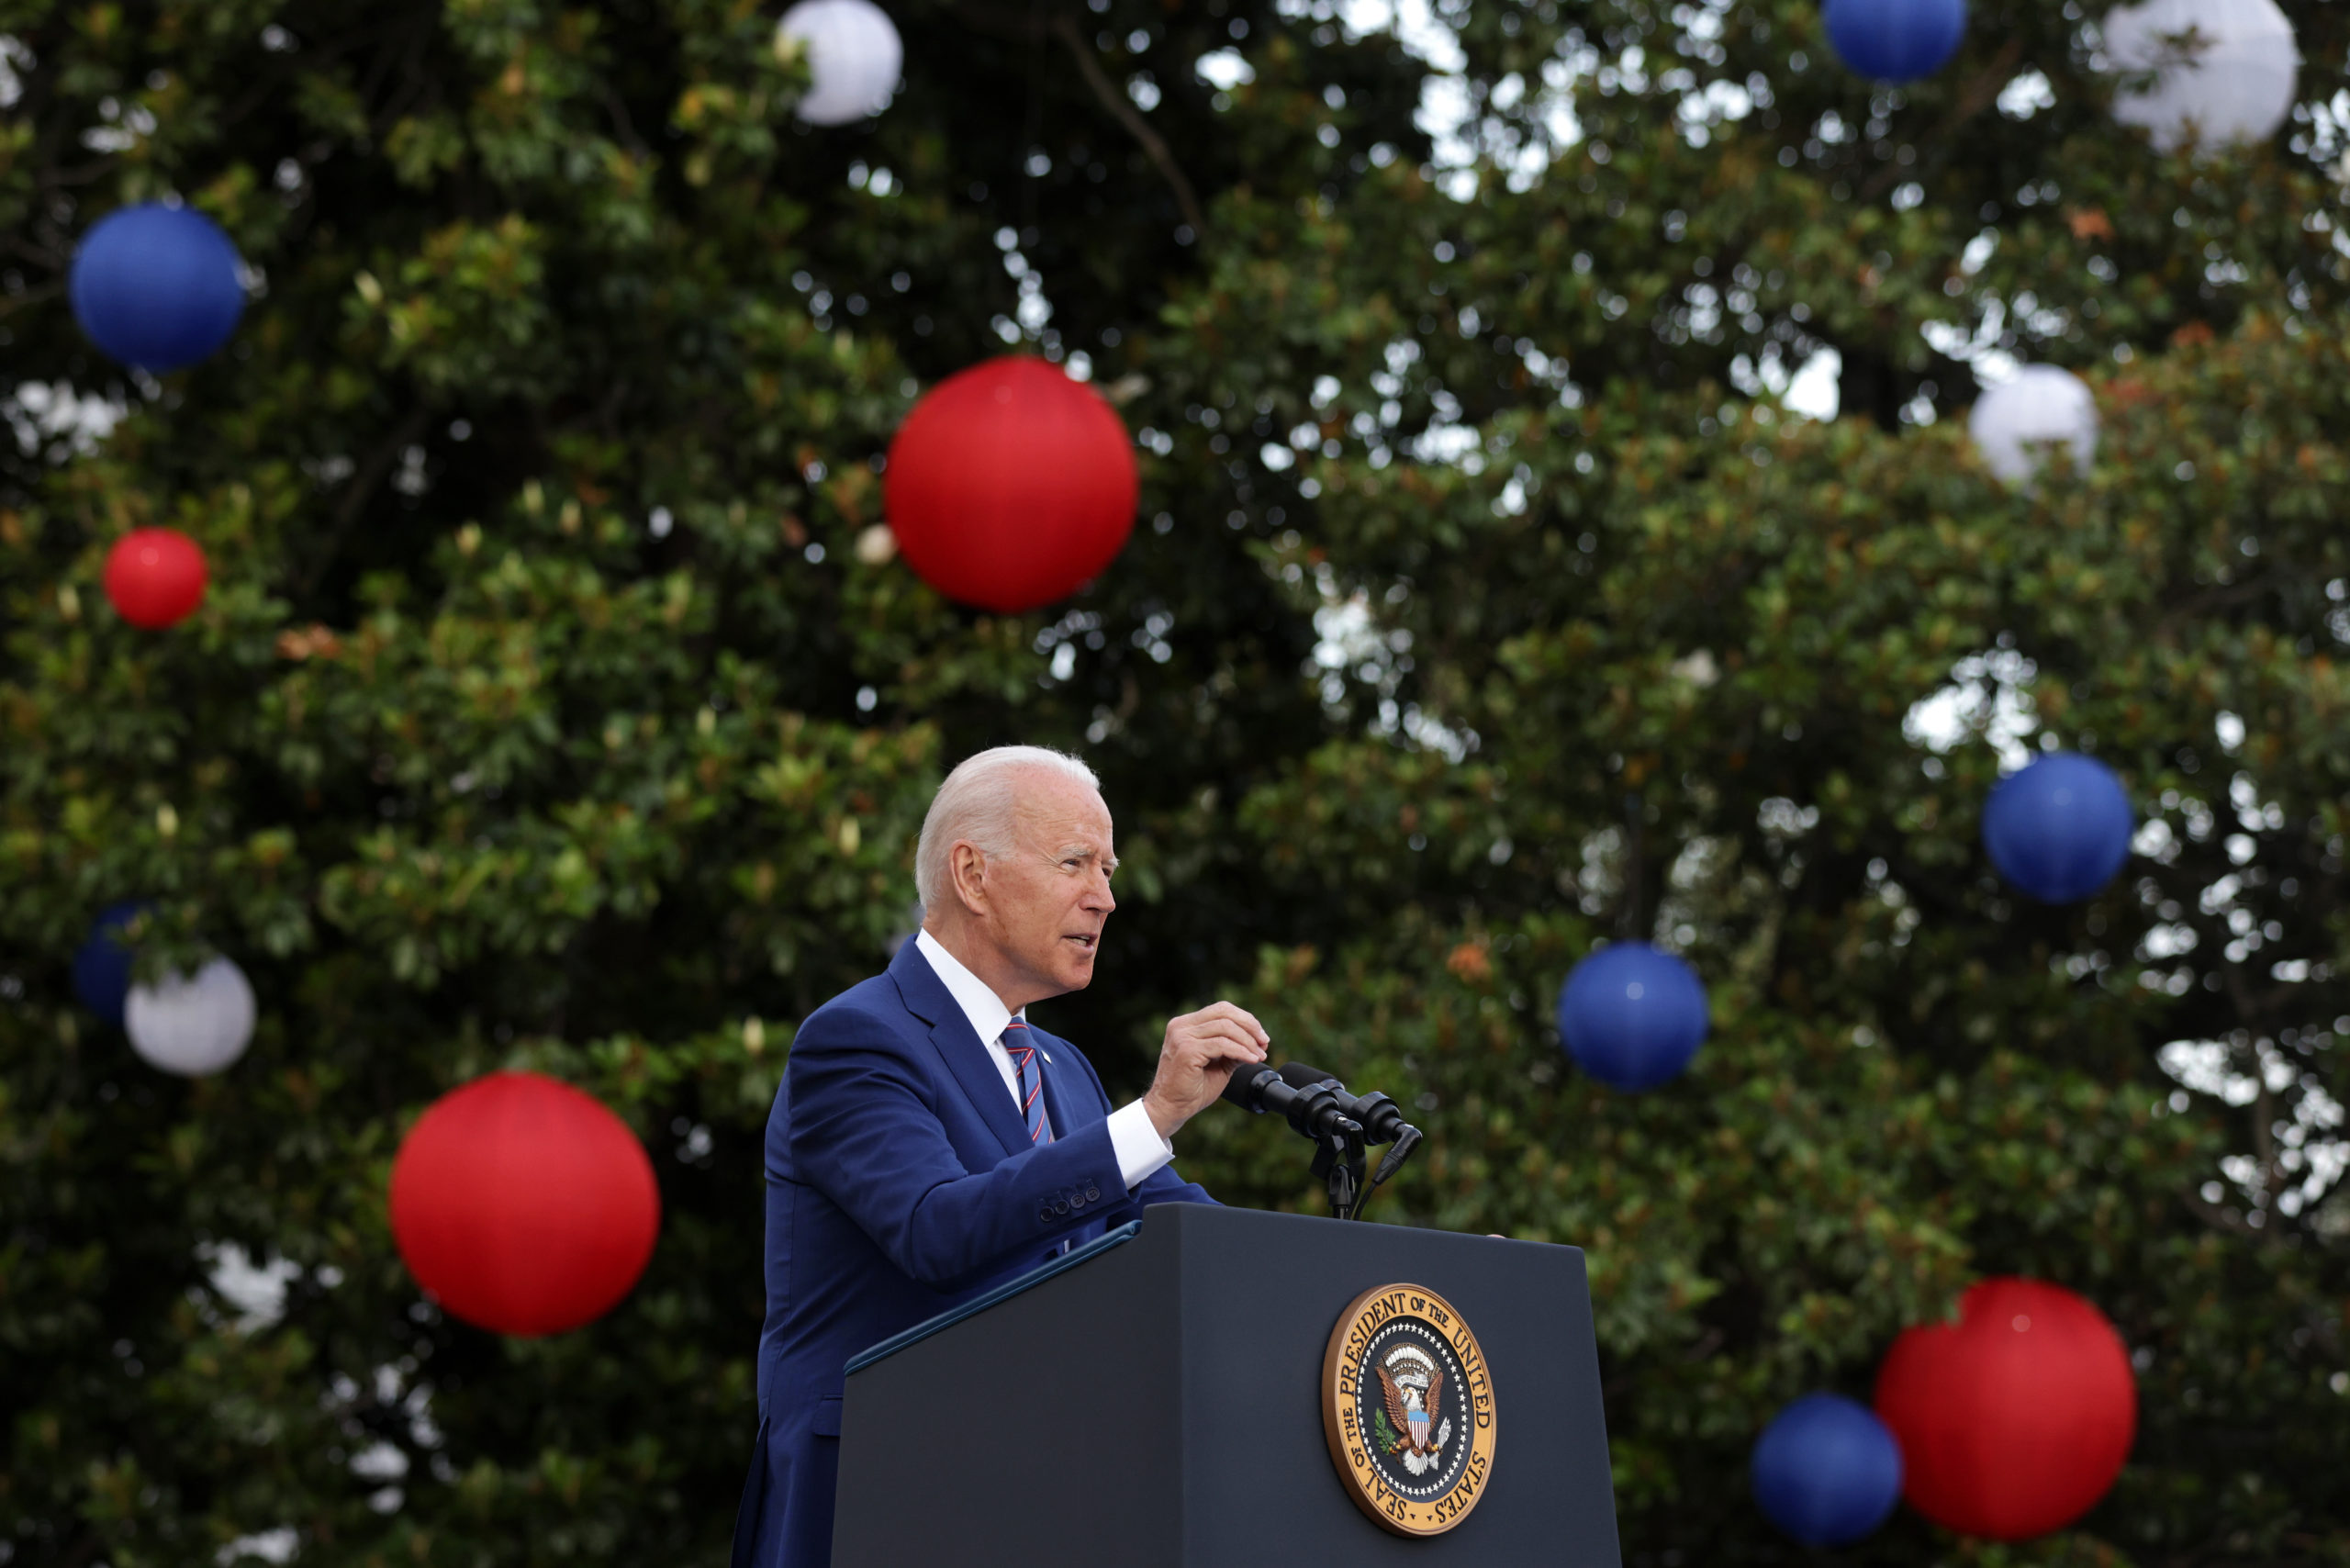 WASHINGTON, DC - JULY 04: U.S. President Joe Biden speaks during a Fourth of July BBQ event to celebrate Independence Day at the South Lawn of the White House July 4, 2021 in Washington, DC. President Biden and first lady Jill Biden hosted about 1,000 guests, including COVID response essential workers and military families, to celebrate the nation’s 245th birthday. (Photo by Alex Wong/Getty Images)